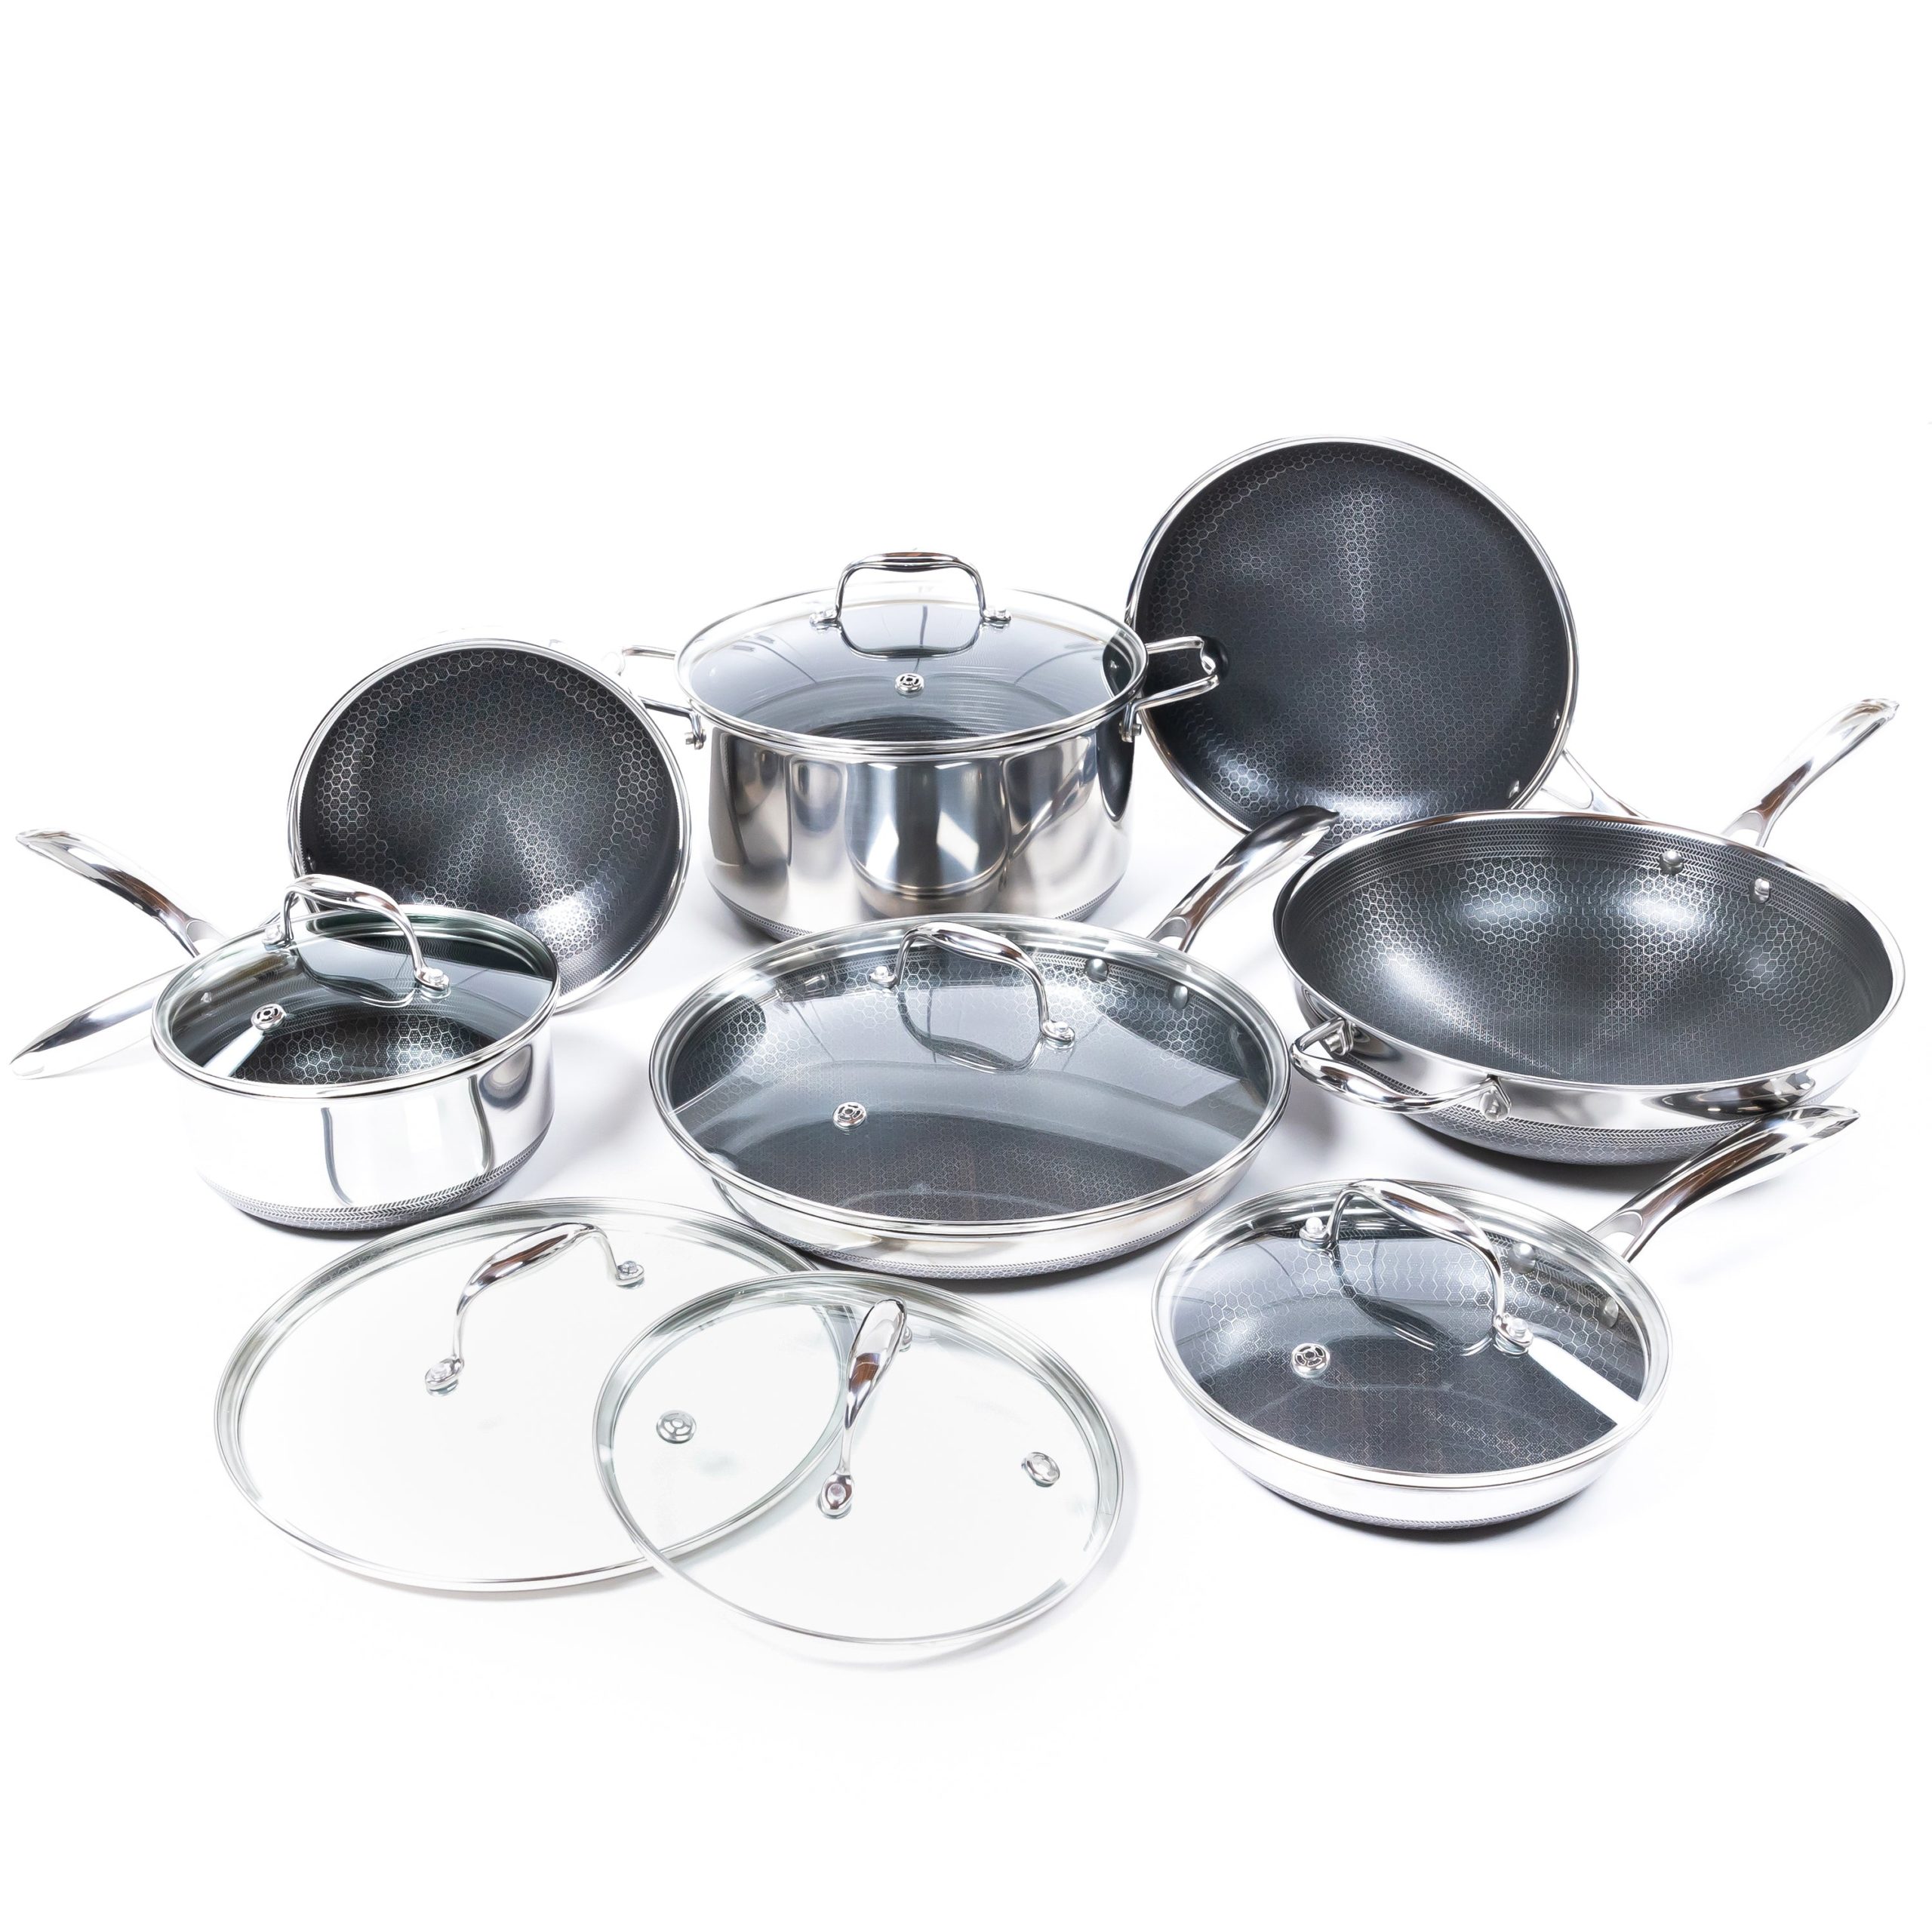 Hexclad cookware bundle containing pots and pans